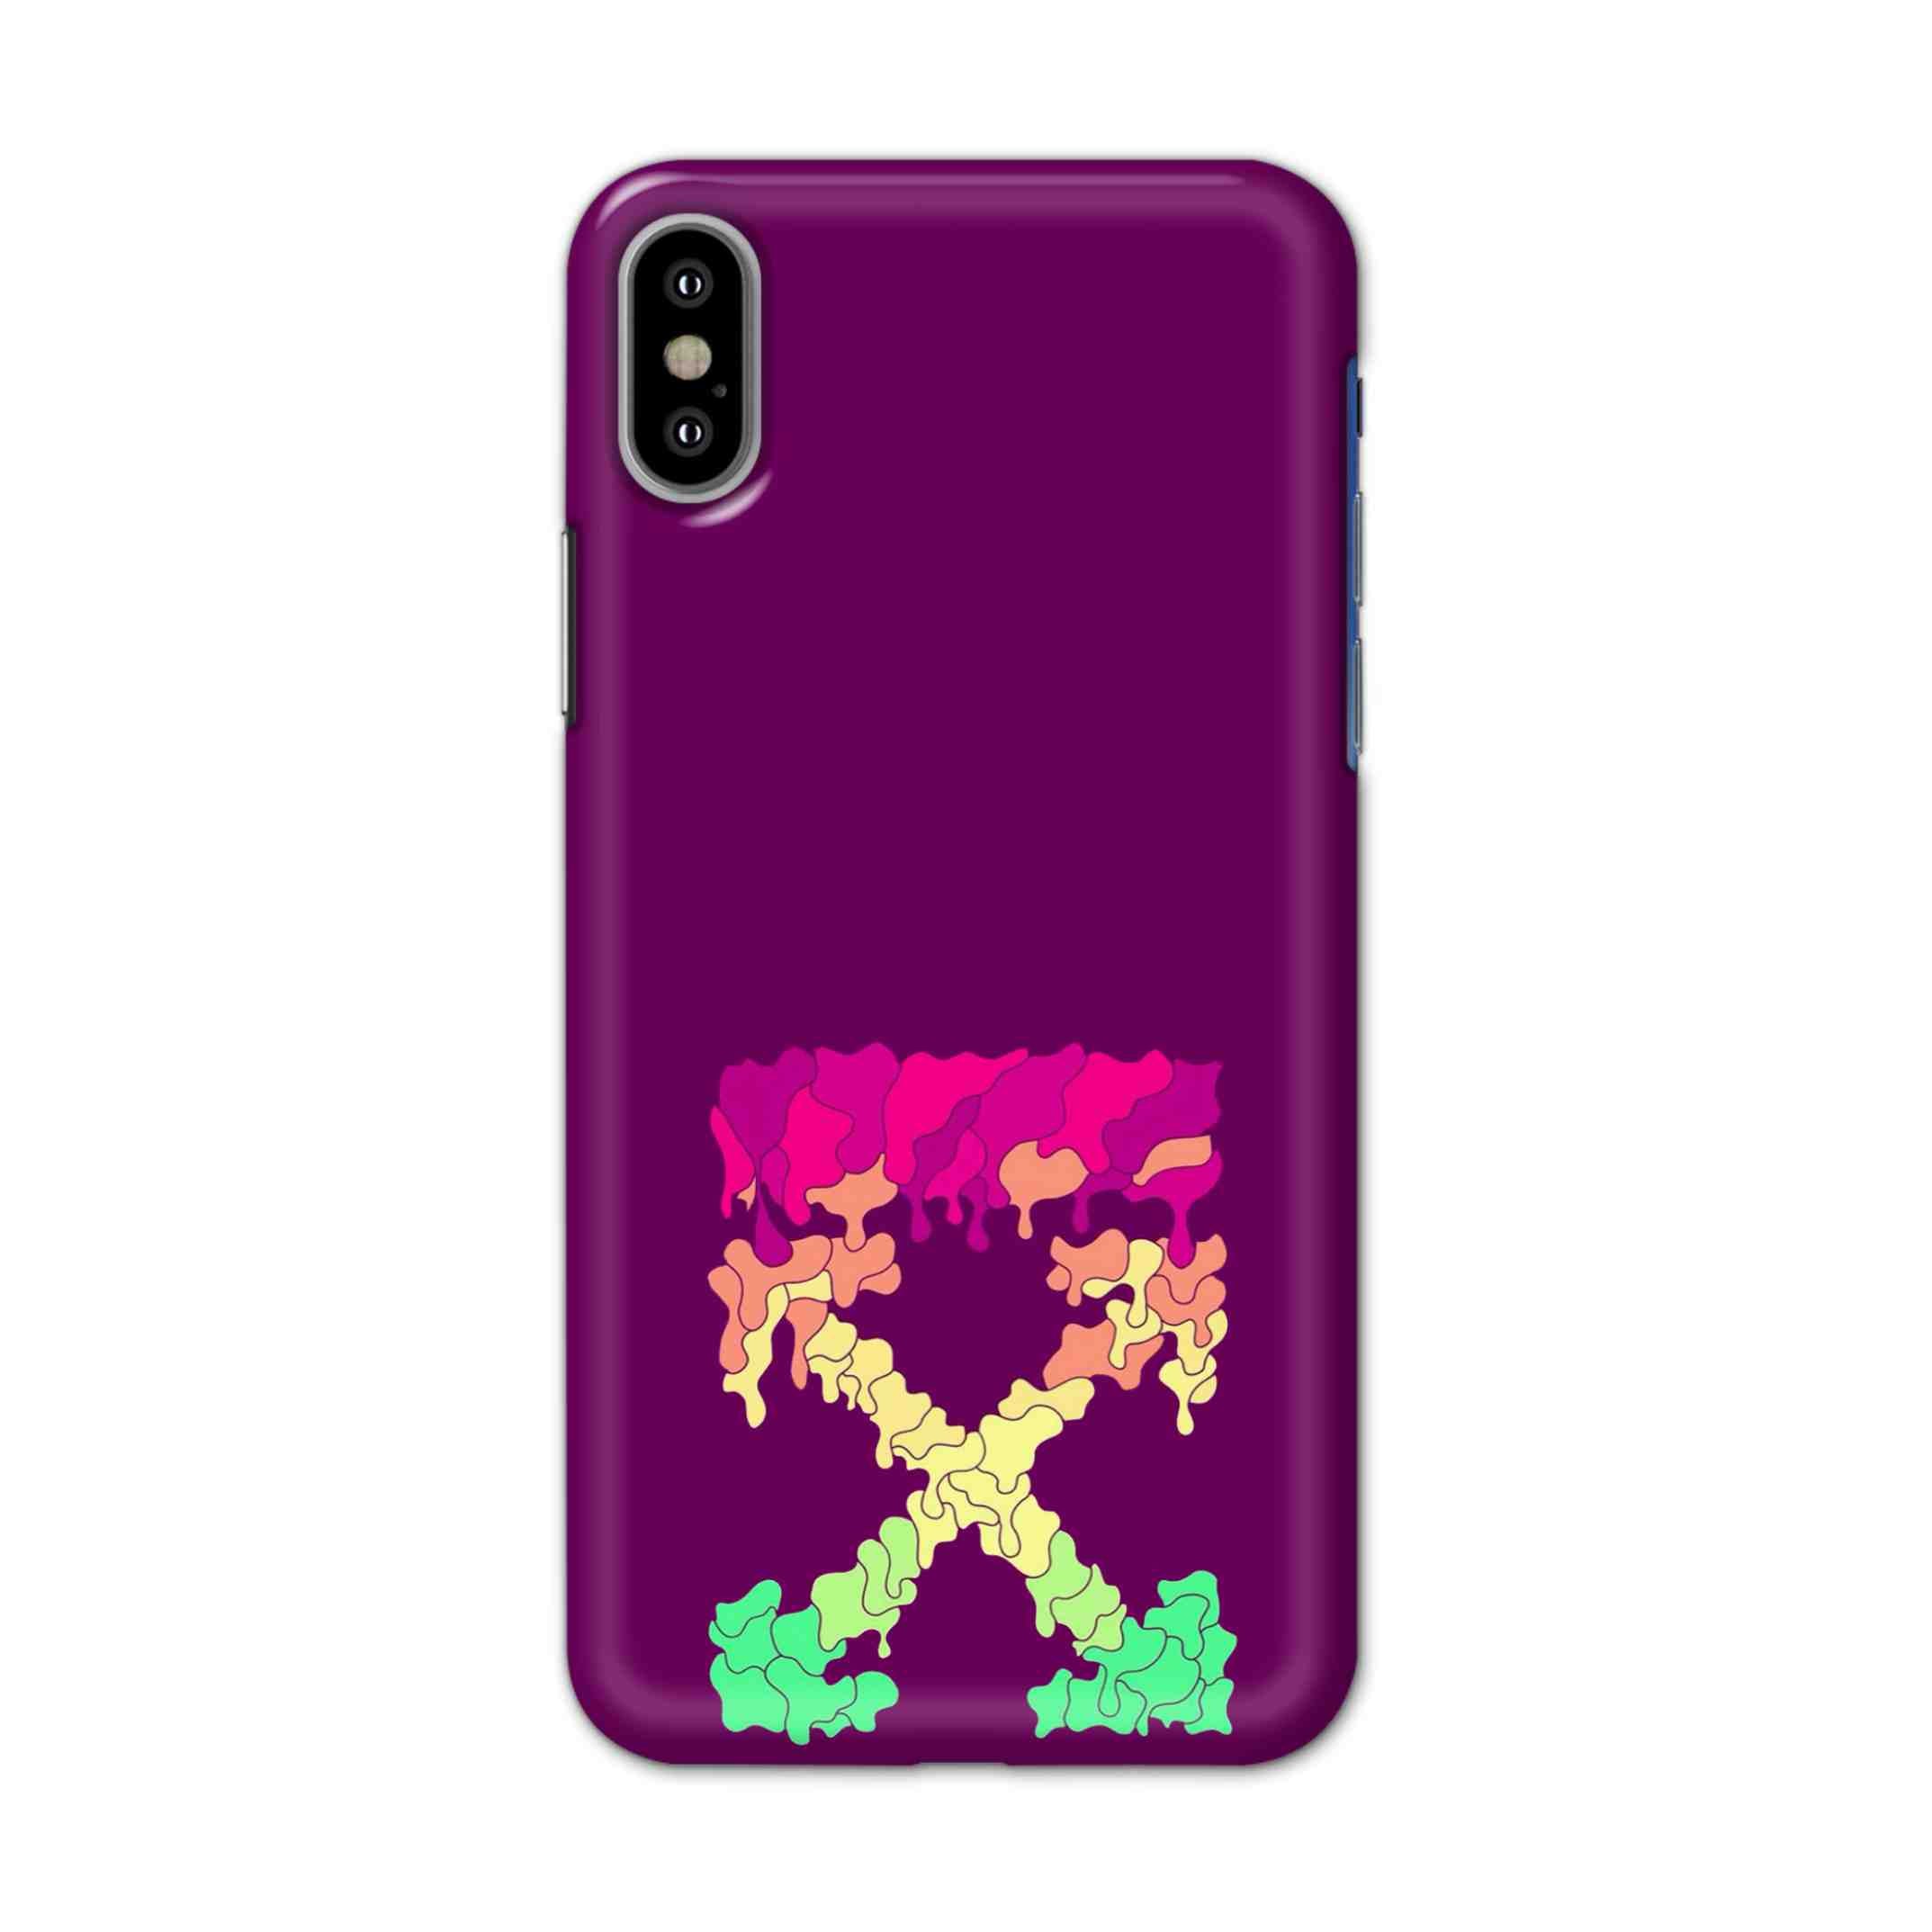 Buy X.O Hard Back Mobile Phone Case/Cover For iPhone X Online